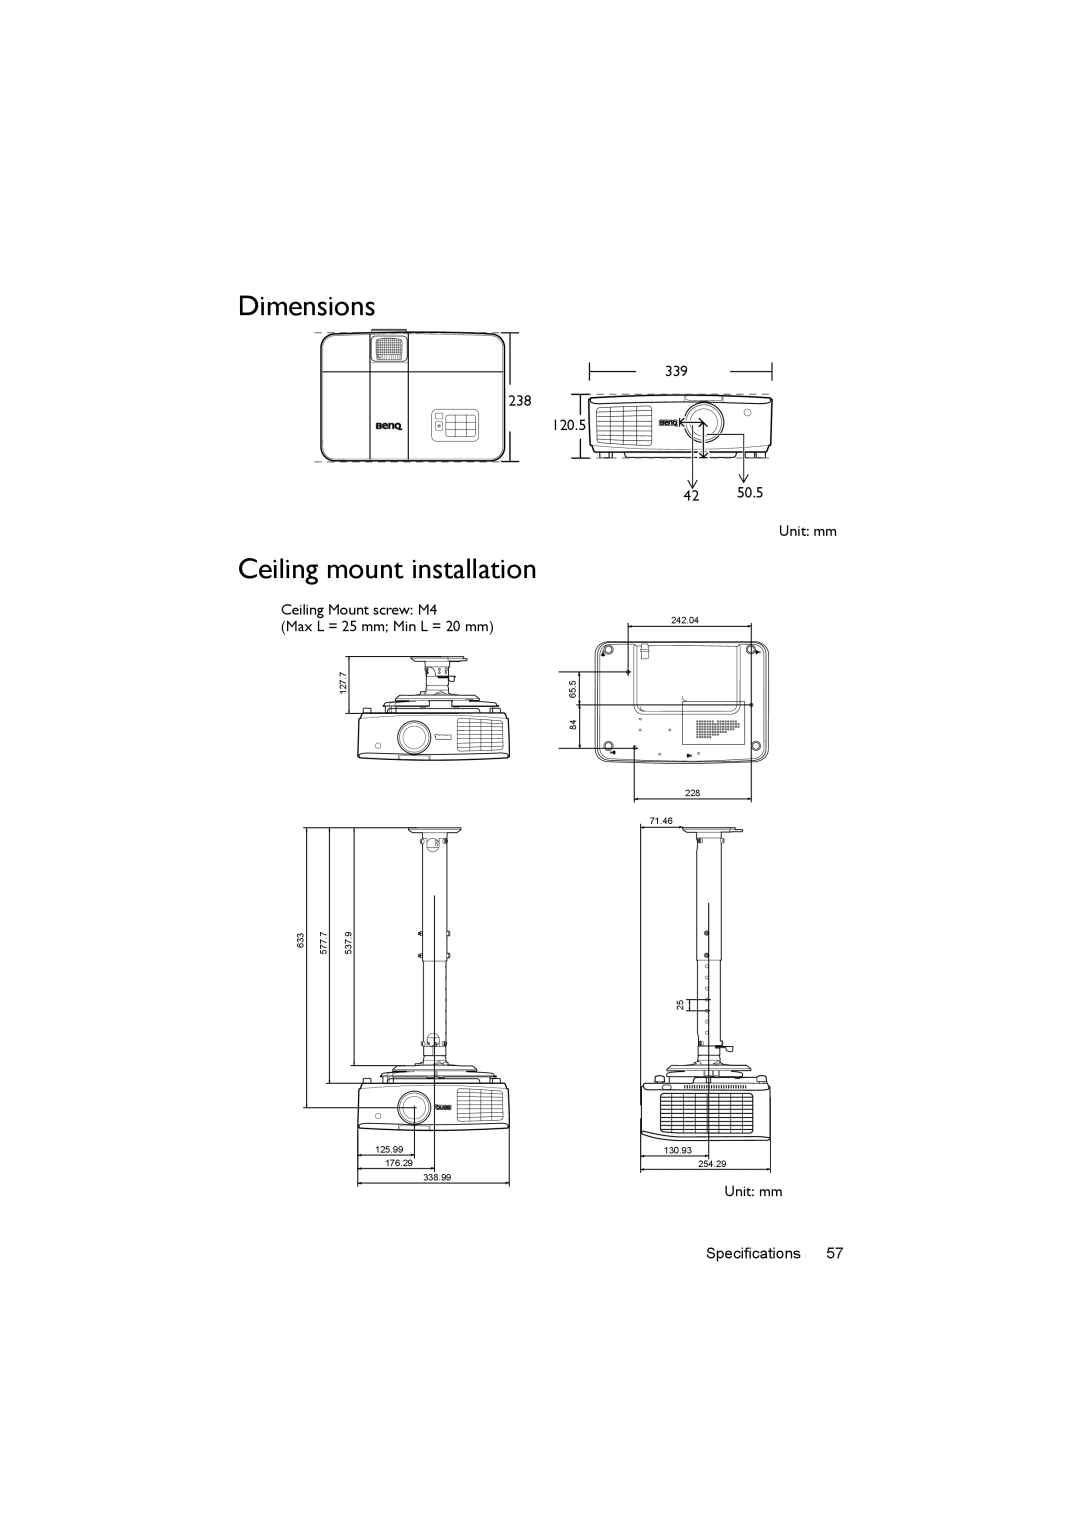 BenQ MX722 user manual Dimensions, Ceiling mount installation, 339 238 120.5, Unit mm, Specifications 